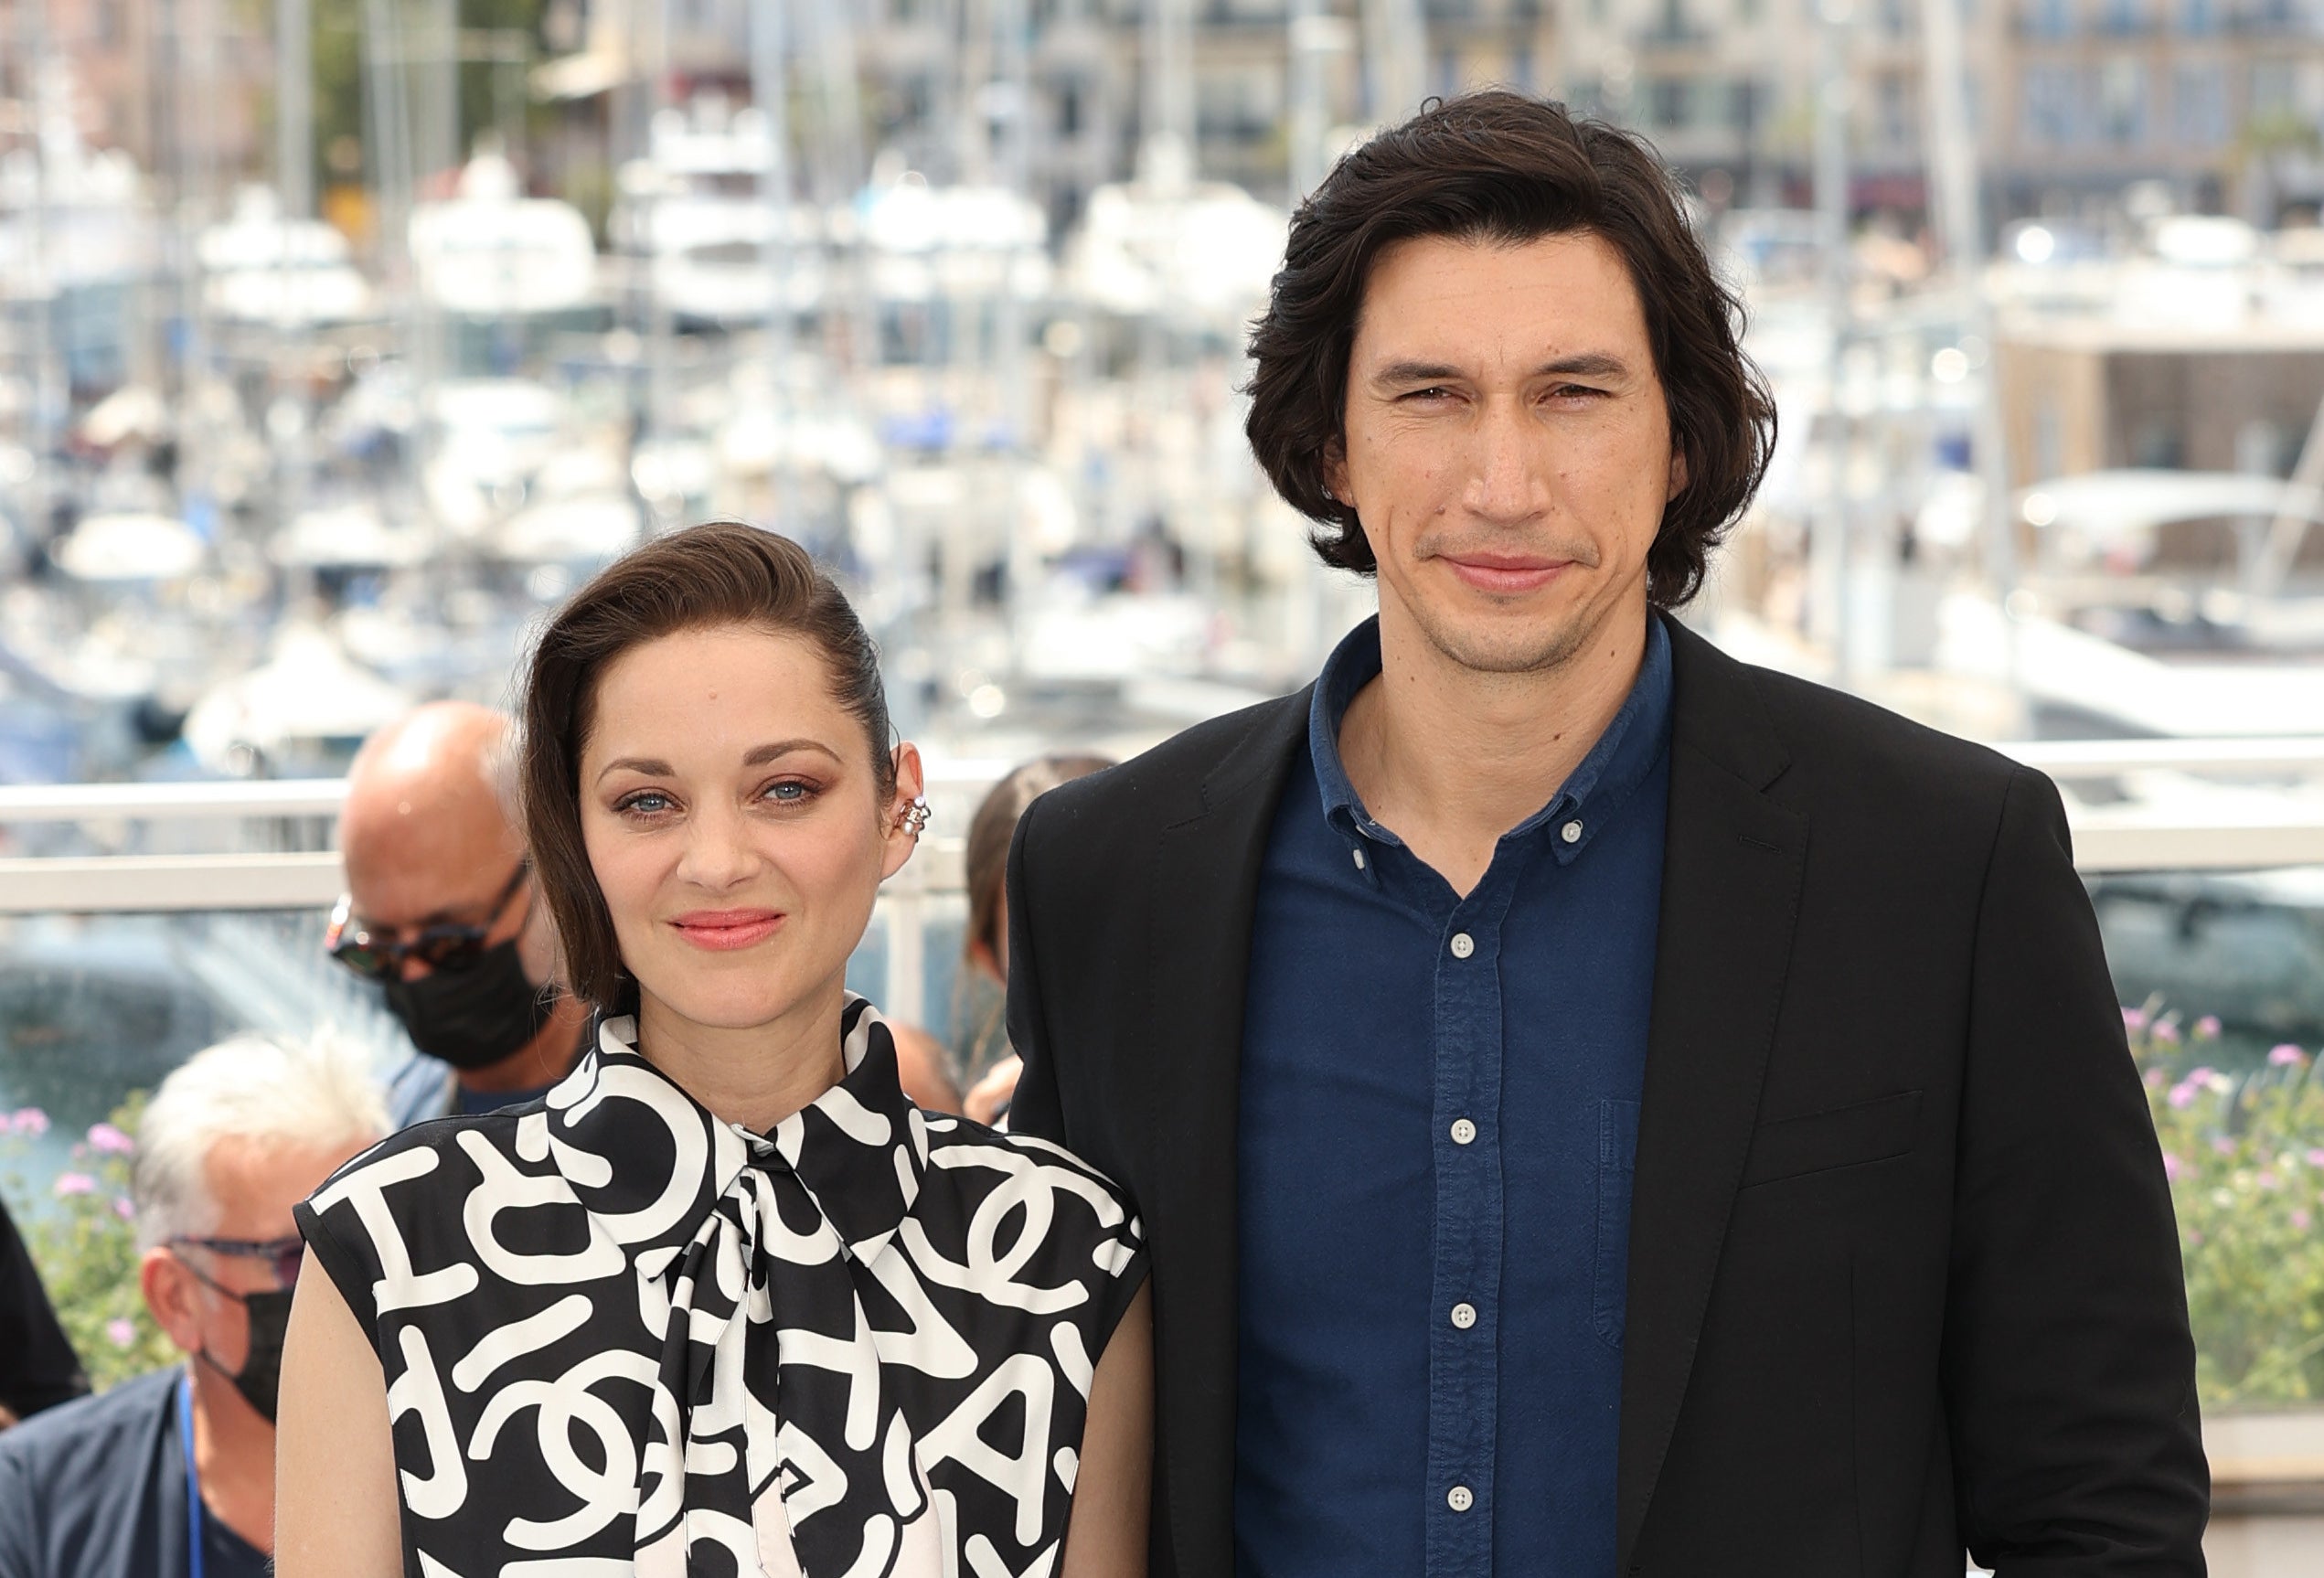 Photo of Marion Cotillard and Adam Driver from the waist up. They&#x27;re both smiling at the camera. She&#x27;s wearing a black and white sleeveless collared shirt and he&#x27;s wearing a dark blue button-up shirt and black suit jacket.